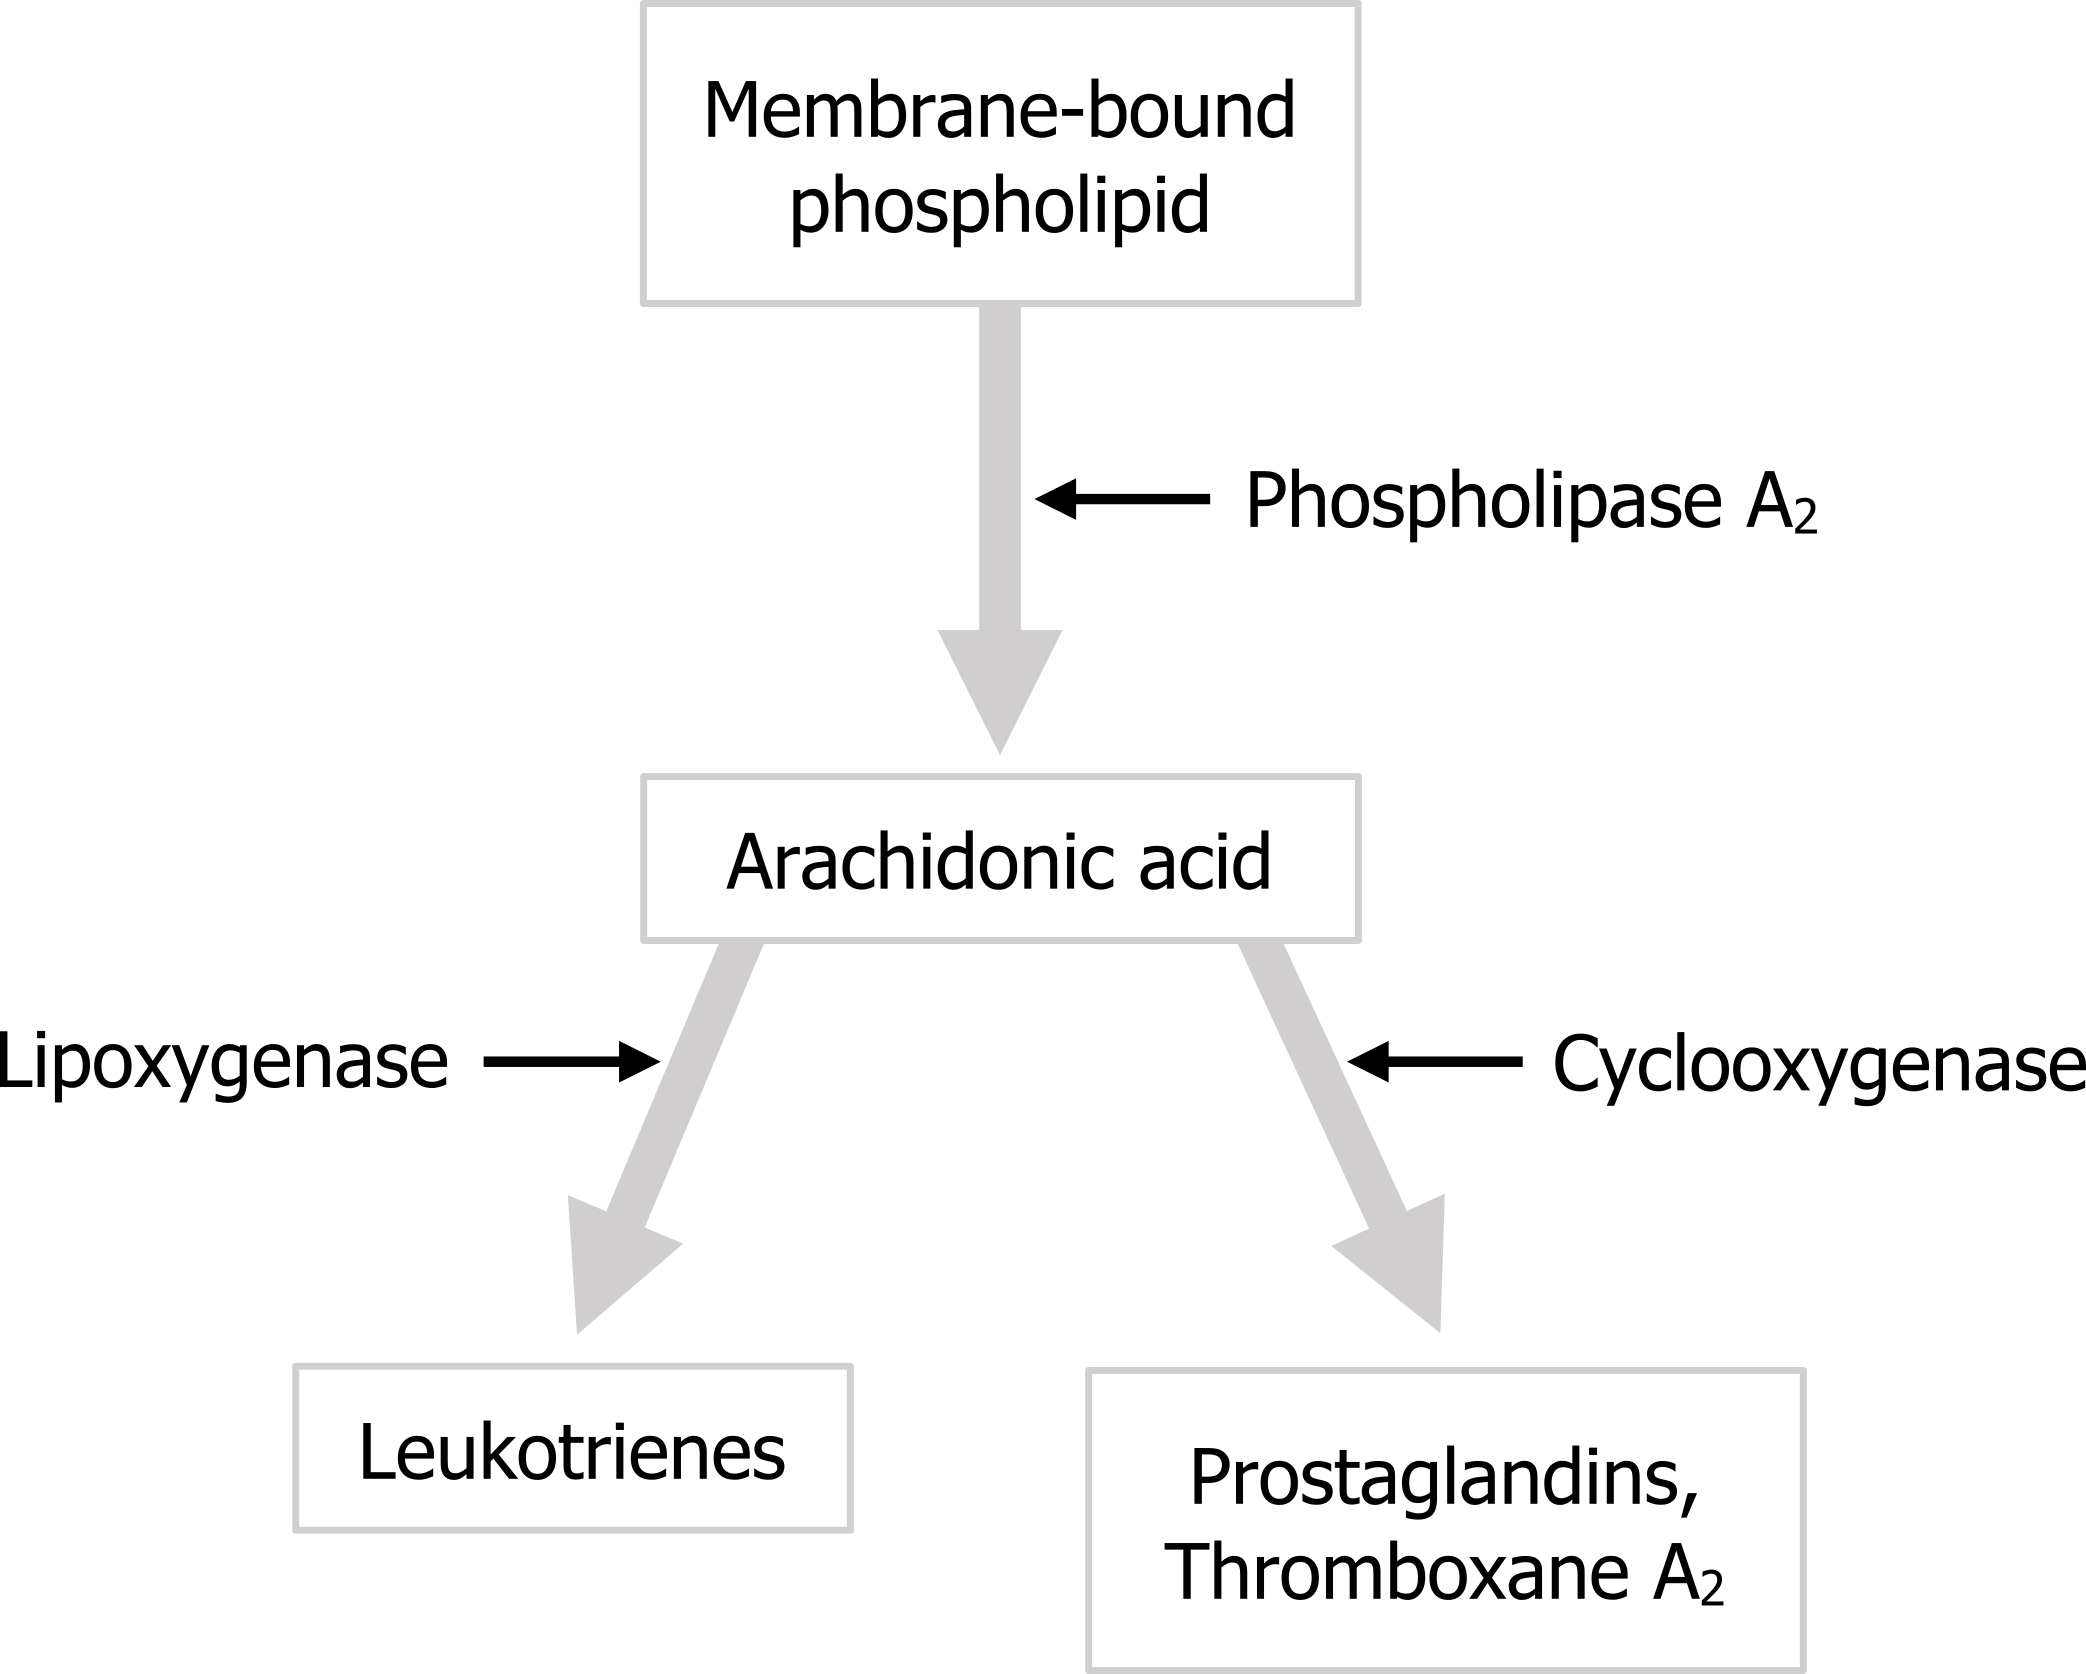 Membrane-bound phospholipid arrow with phospholipase A2 pointing to it to arachidonic acid. Arachidonic acid arrow with lipoxygenase pointing to it to leukotrienes. Arachidonic acid arrow with cyclooxygenase pointing to it to prostaglandins, thromboxane A2.